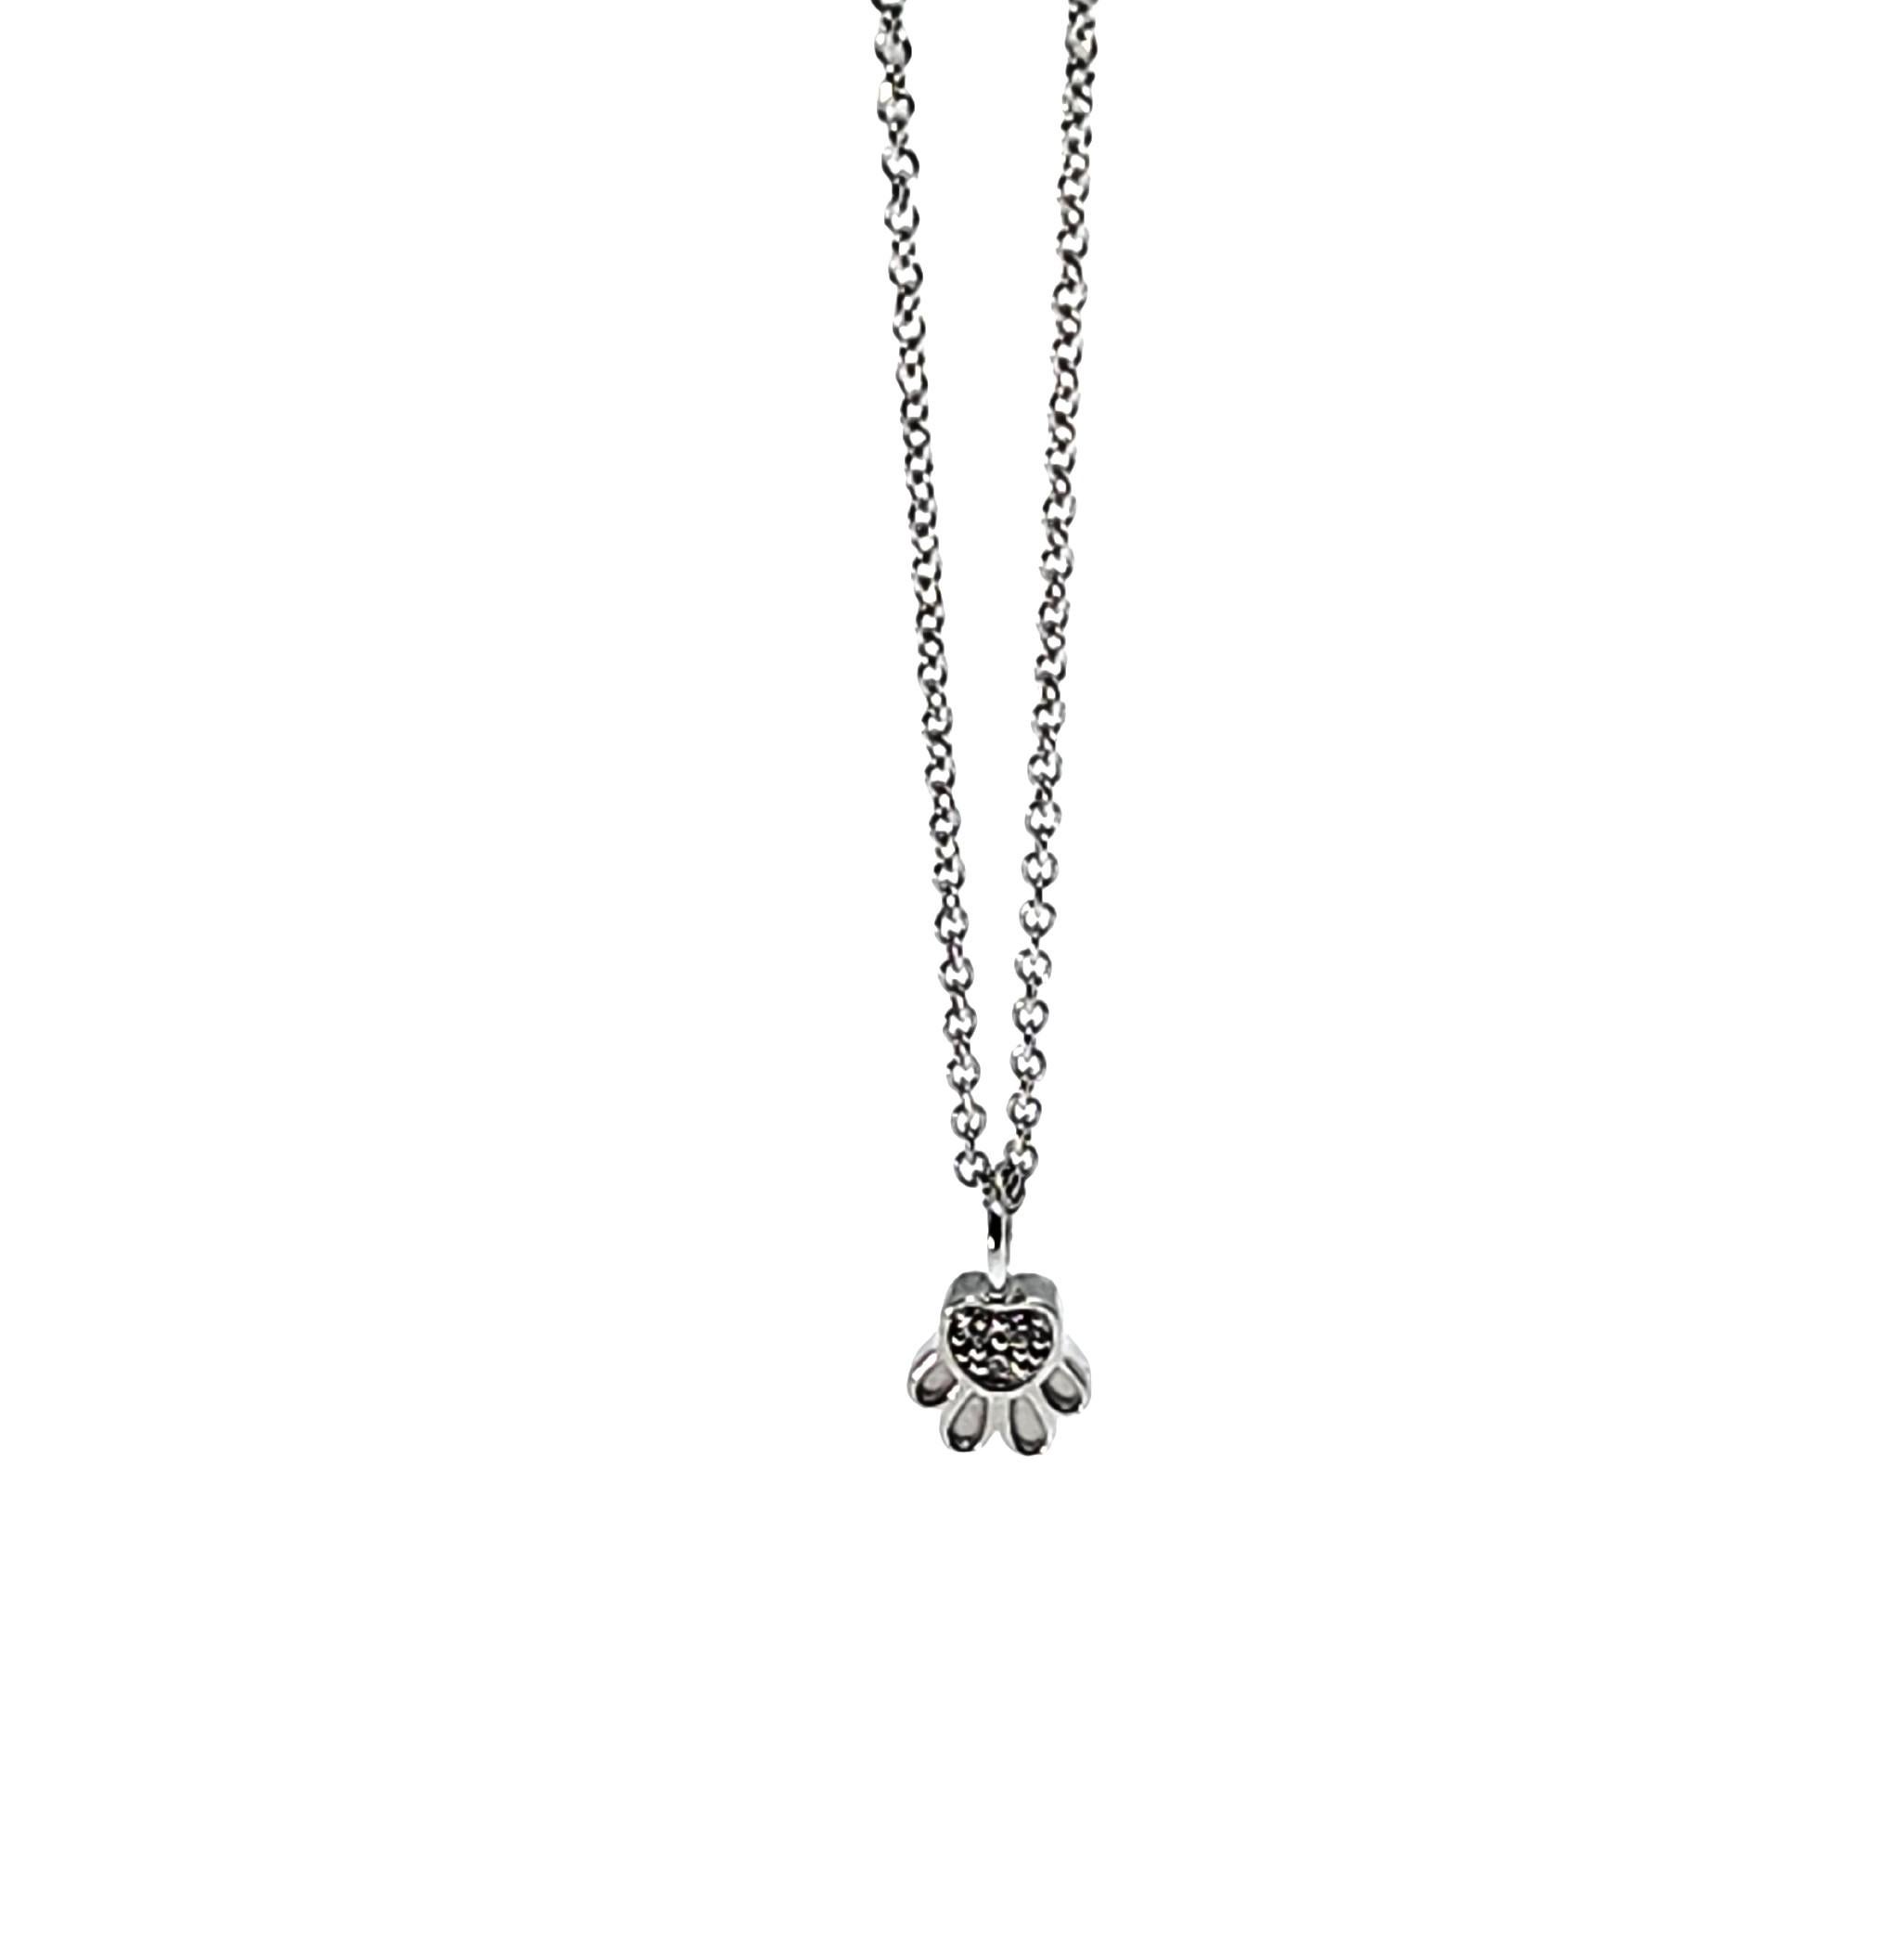 Companion mini Paw Print Charm Necklace to complete the look with our Mini Paw Print Earrings for multi piercings in 14K white gold and white diamonds. Can be engraved on back in limited letters. Wear our pet love on your neck. 
Symbolize your pet